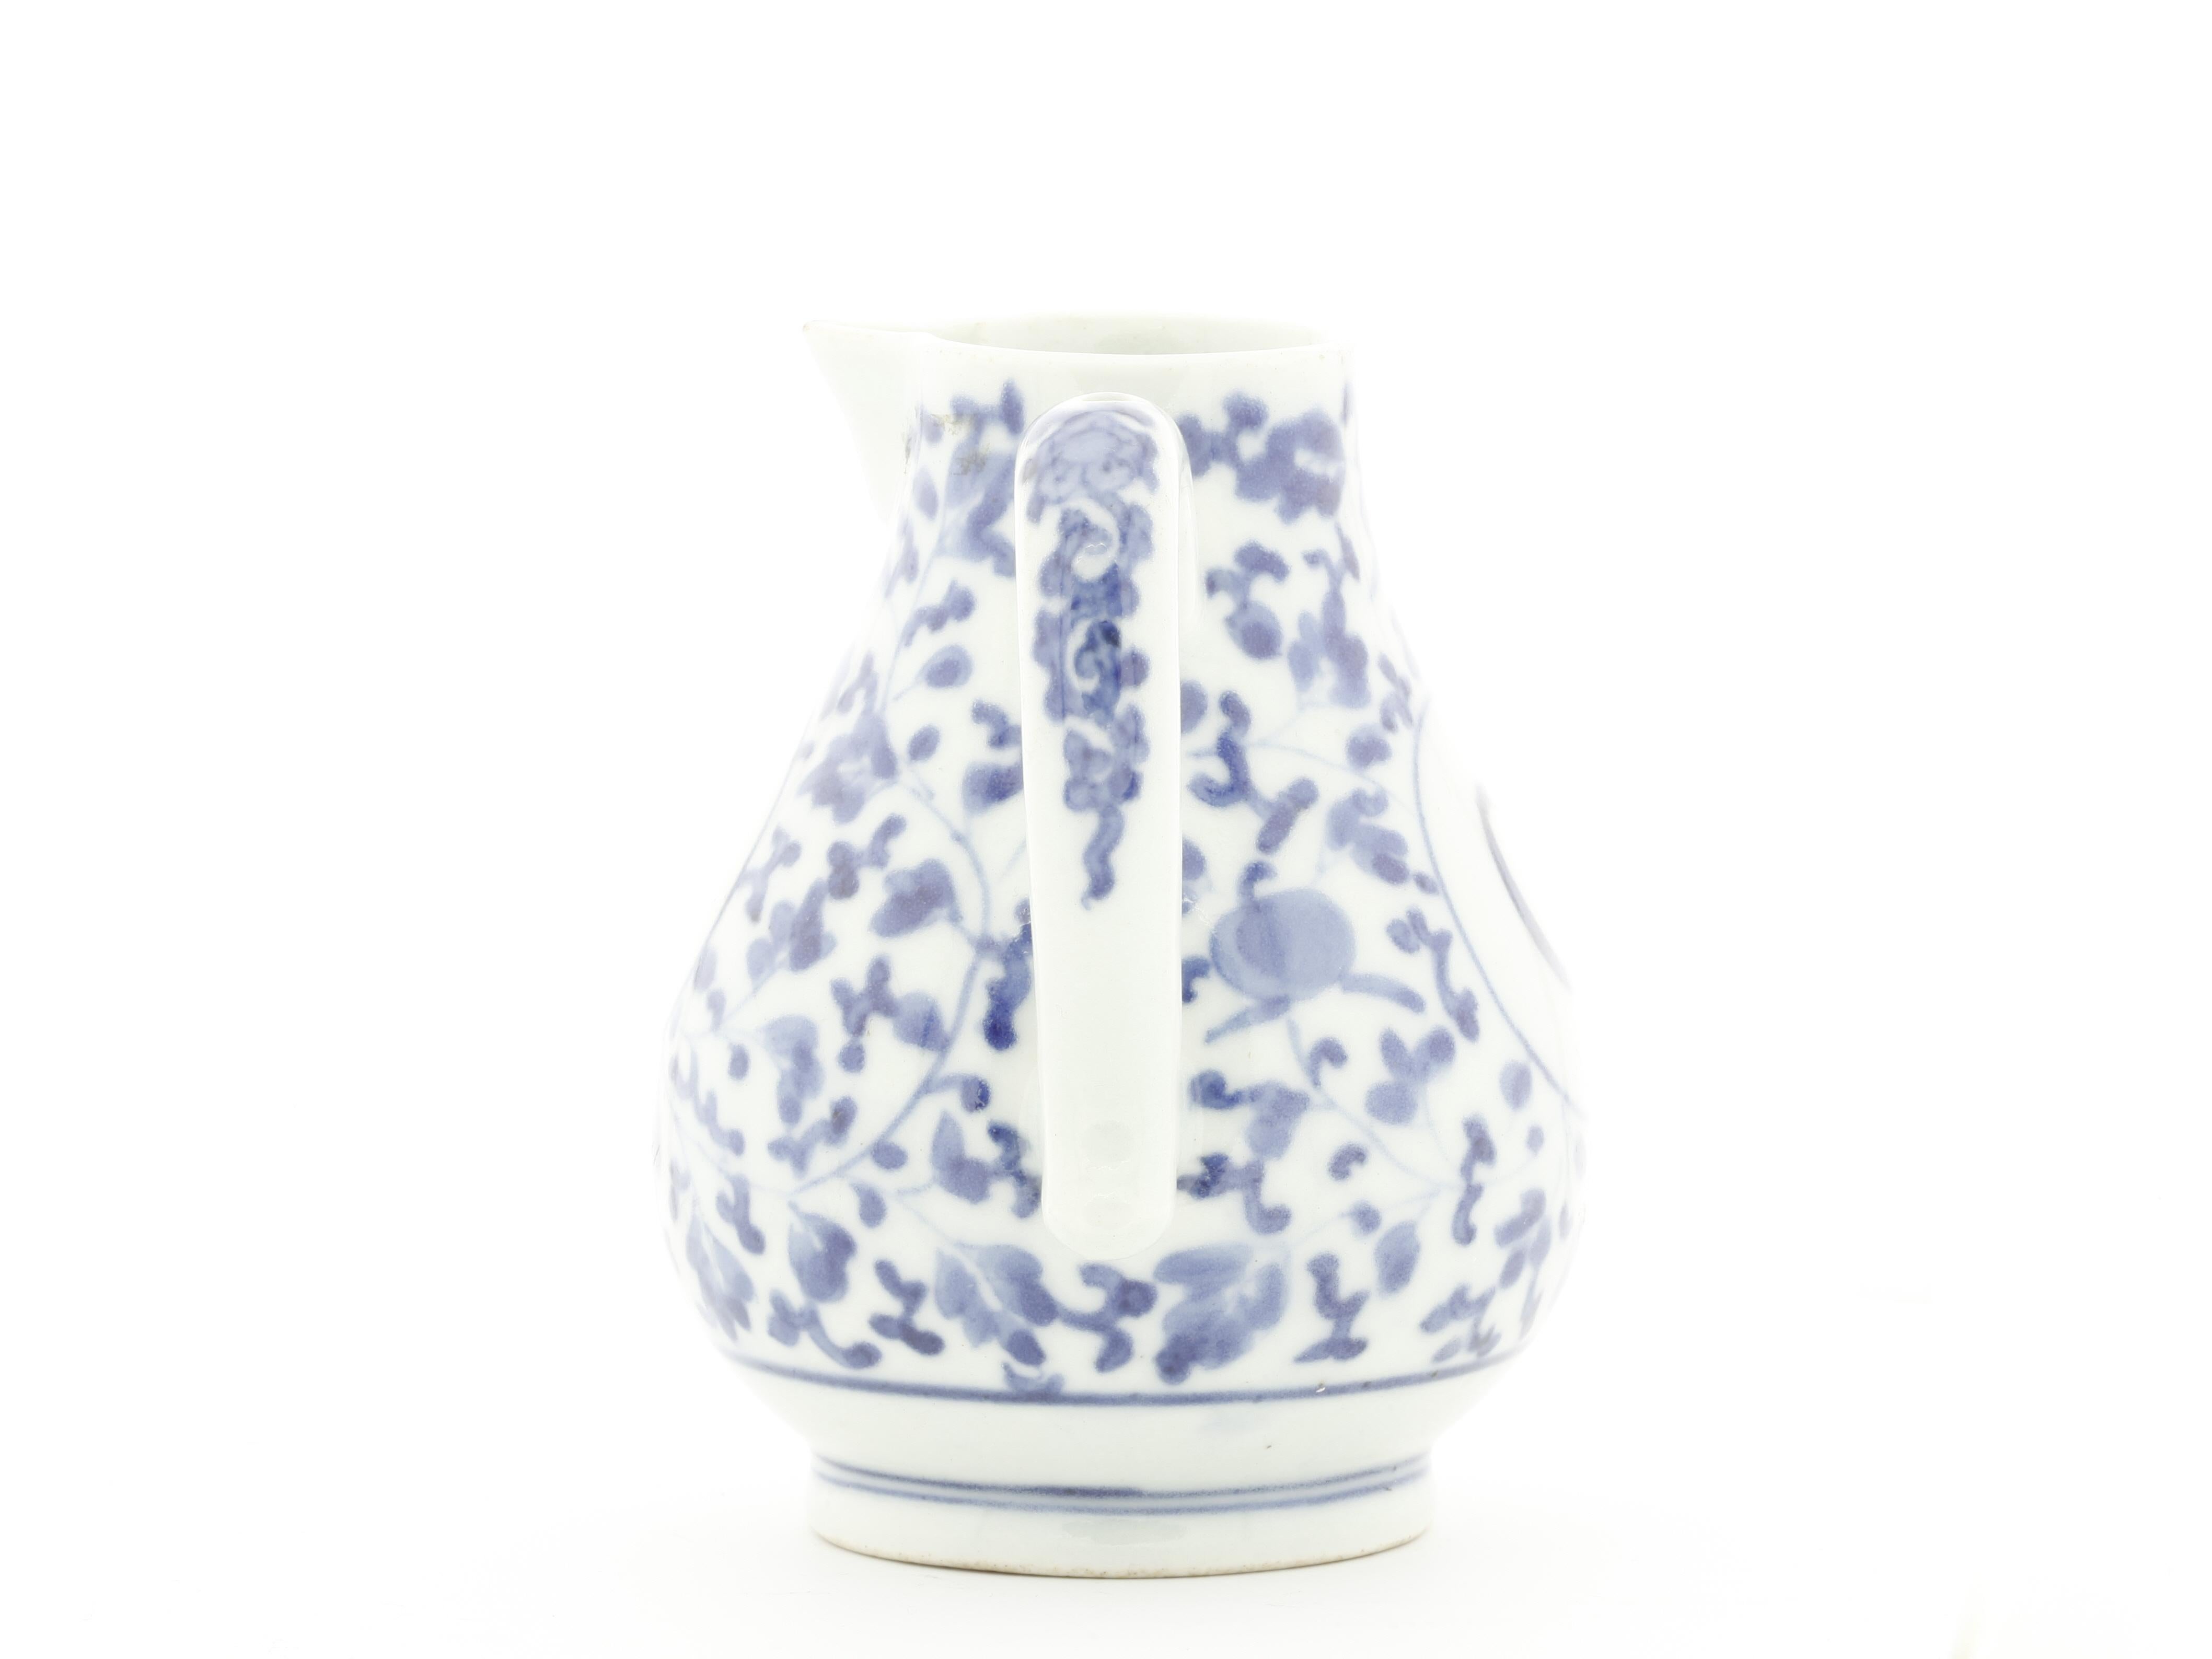 Title: Blue and White Imari Oil Ewer
Date: Early 18th century
Dimensions: 8.5 x 10.4 cm

An oviform imari oil ewer with underglaze painting in blue, a roundel bears the initial 'O' (oil). 

This blue and white imari ewer is representative of